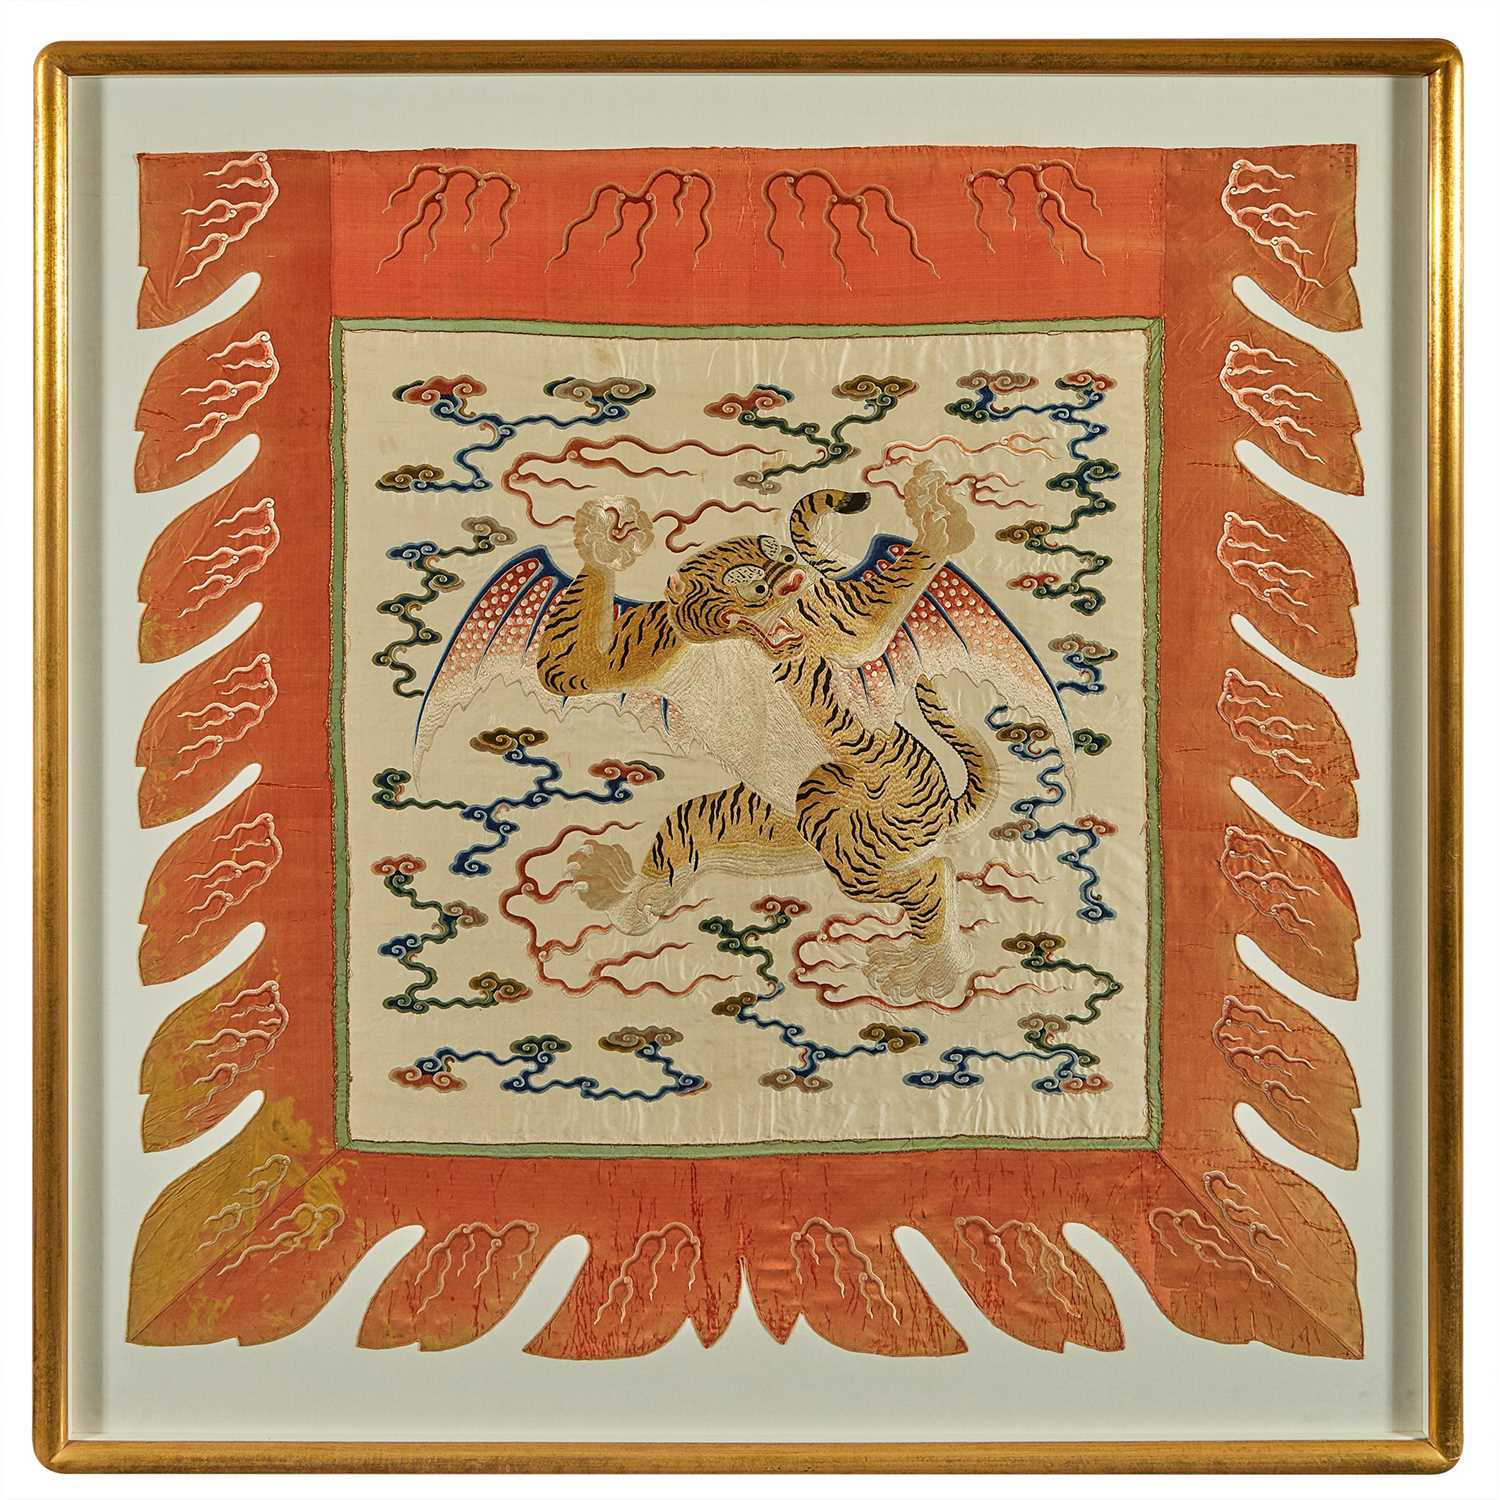 Lot 109 - An Exceptionally Rare Chinese Embroidered Silk "Flying Tiger" Banner